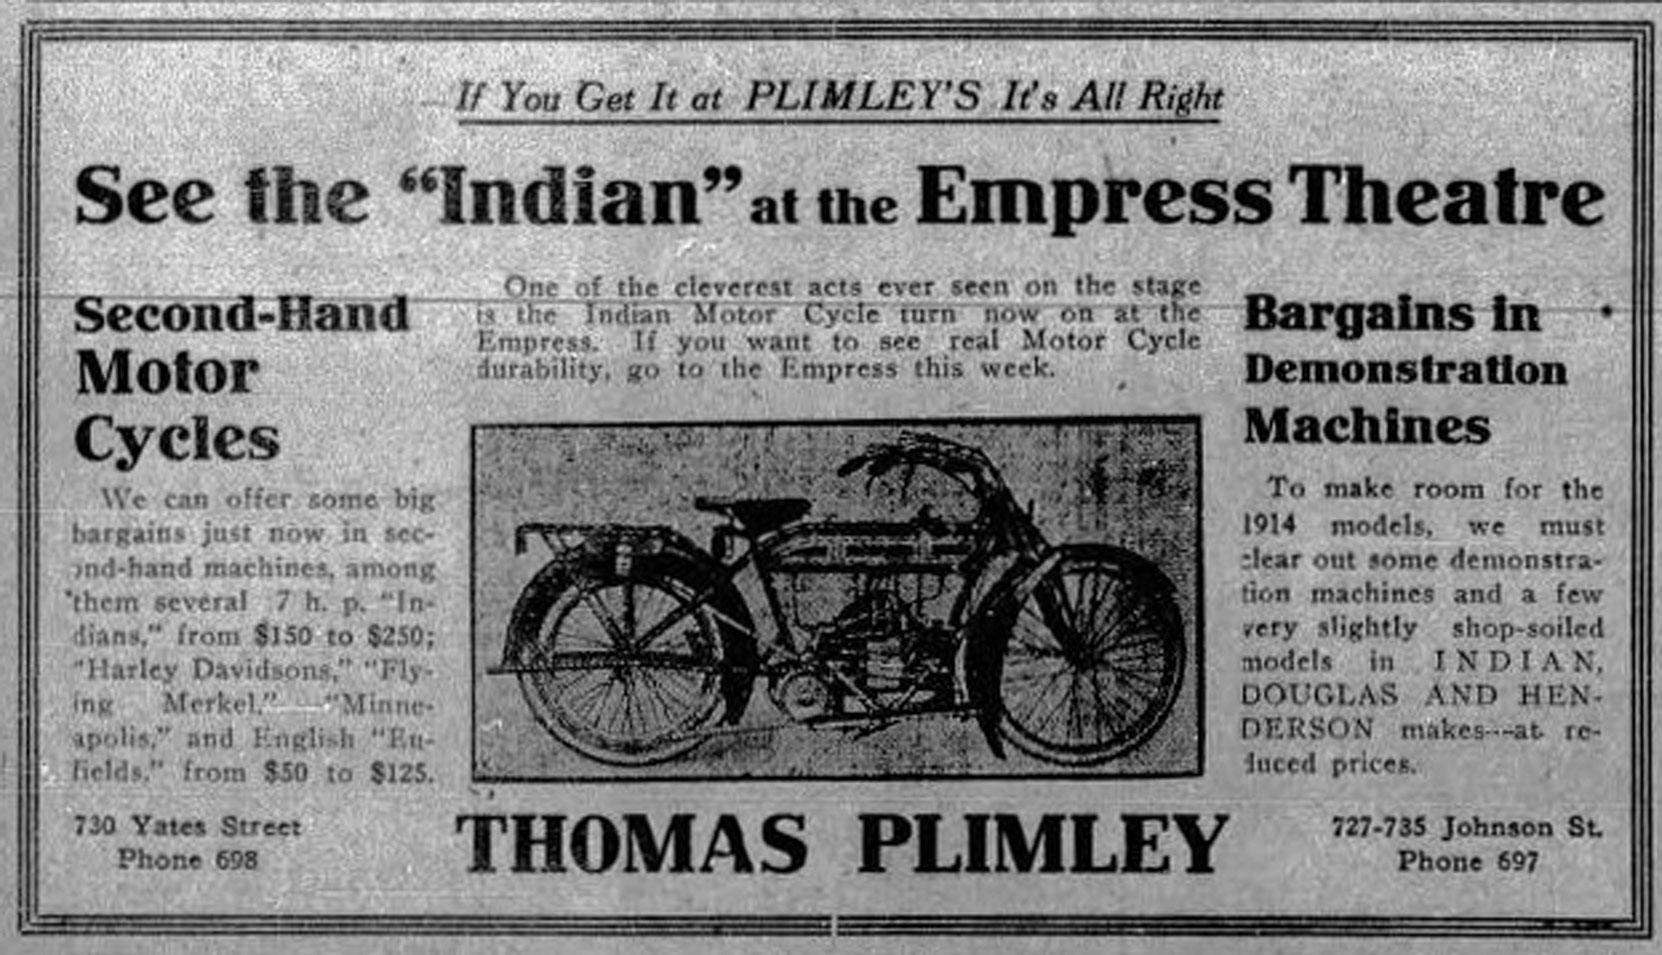 1913 advertisement for Indian motorcycles, sold by Thomas Plimley Ltd., 727-731 Johnson Street and 730 Yates Street. (Victoria Online Sightseeing Tours collection)